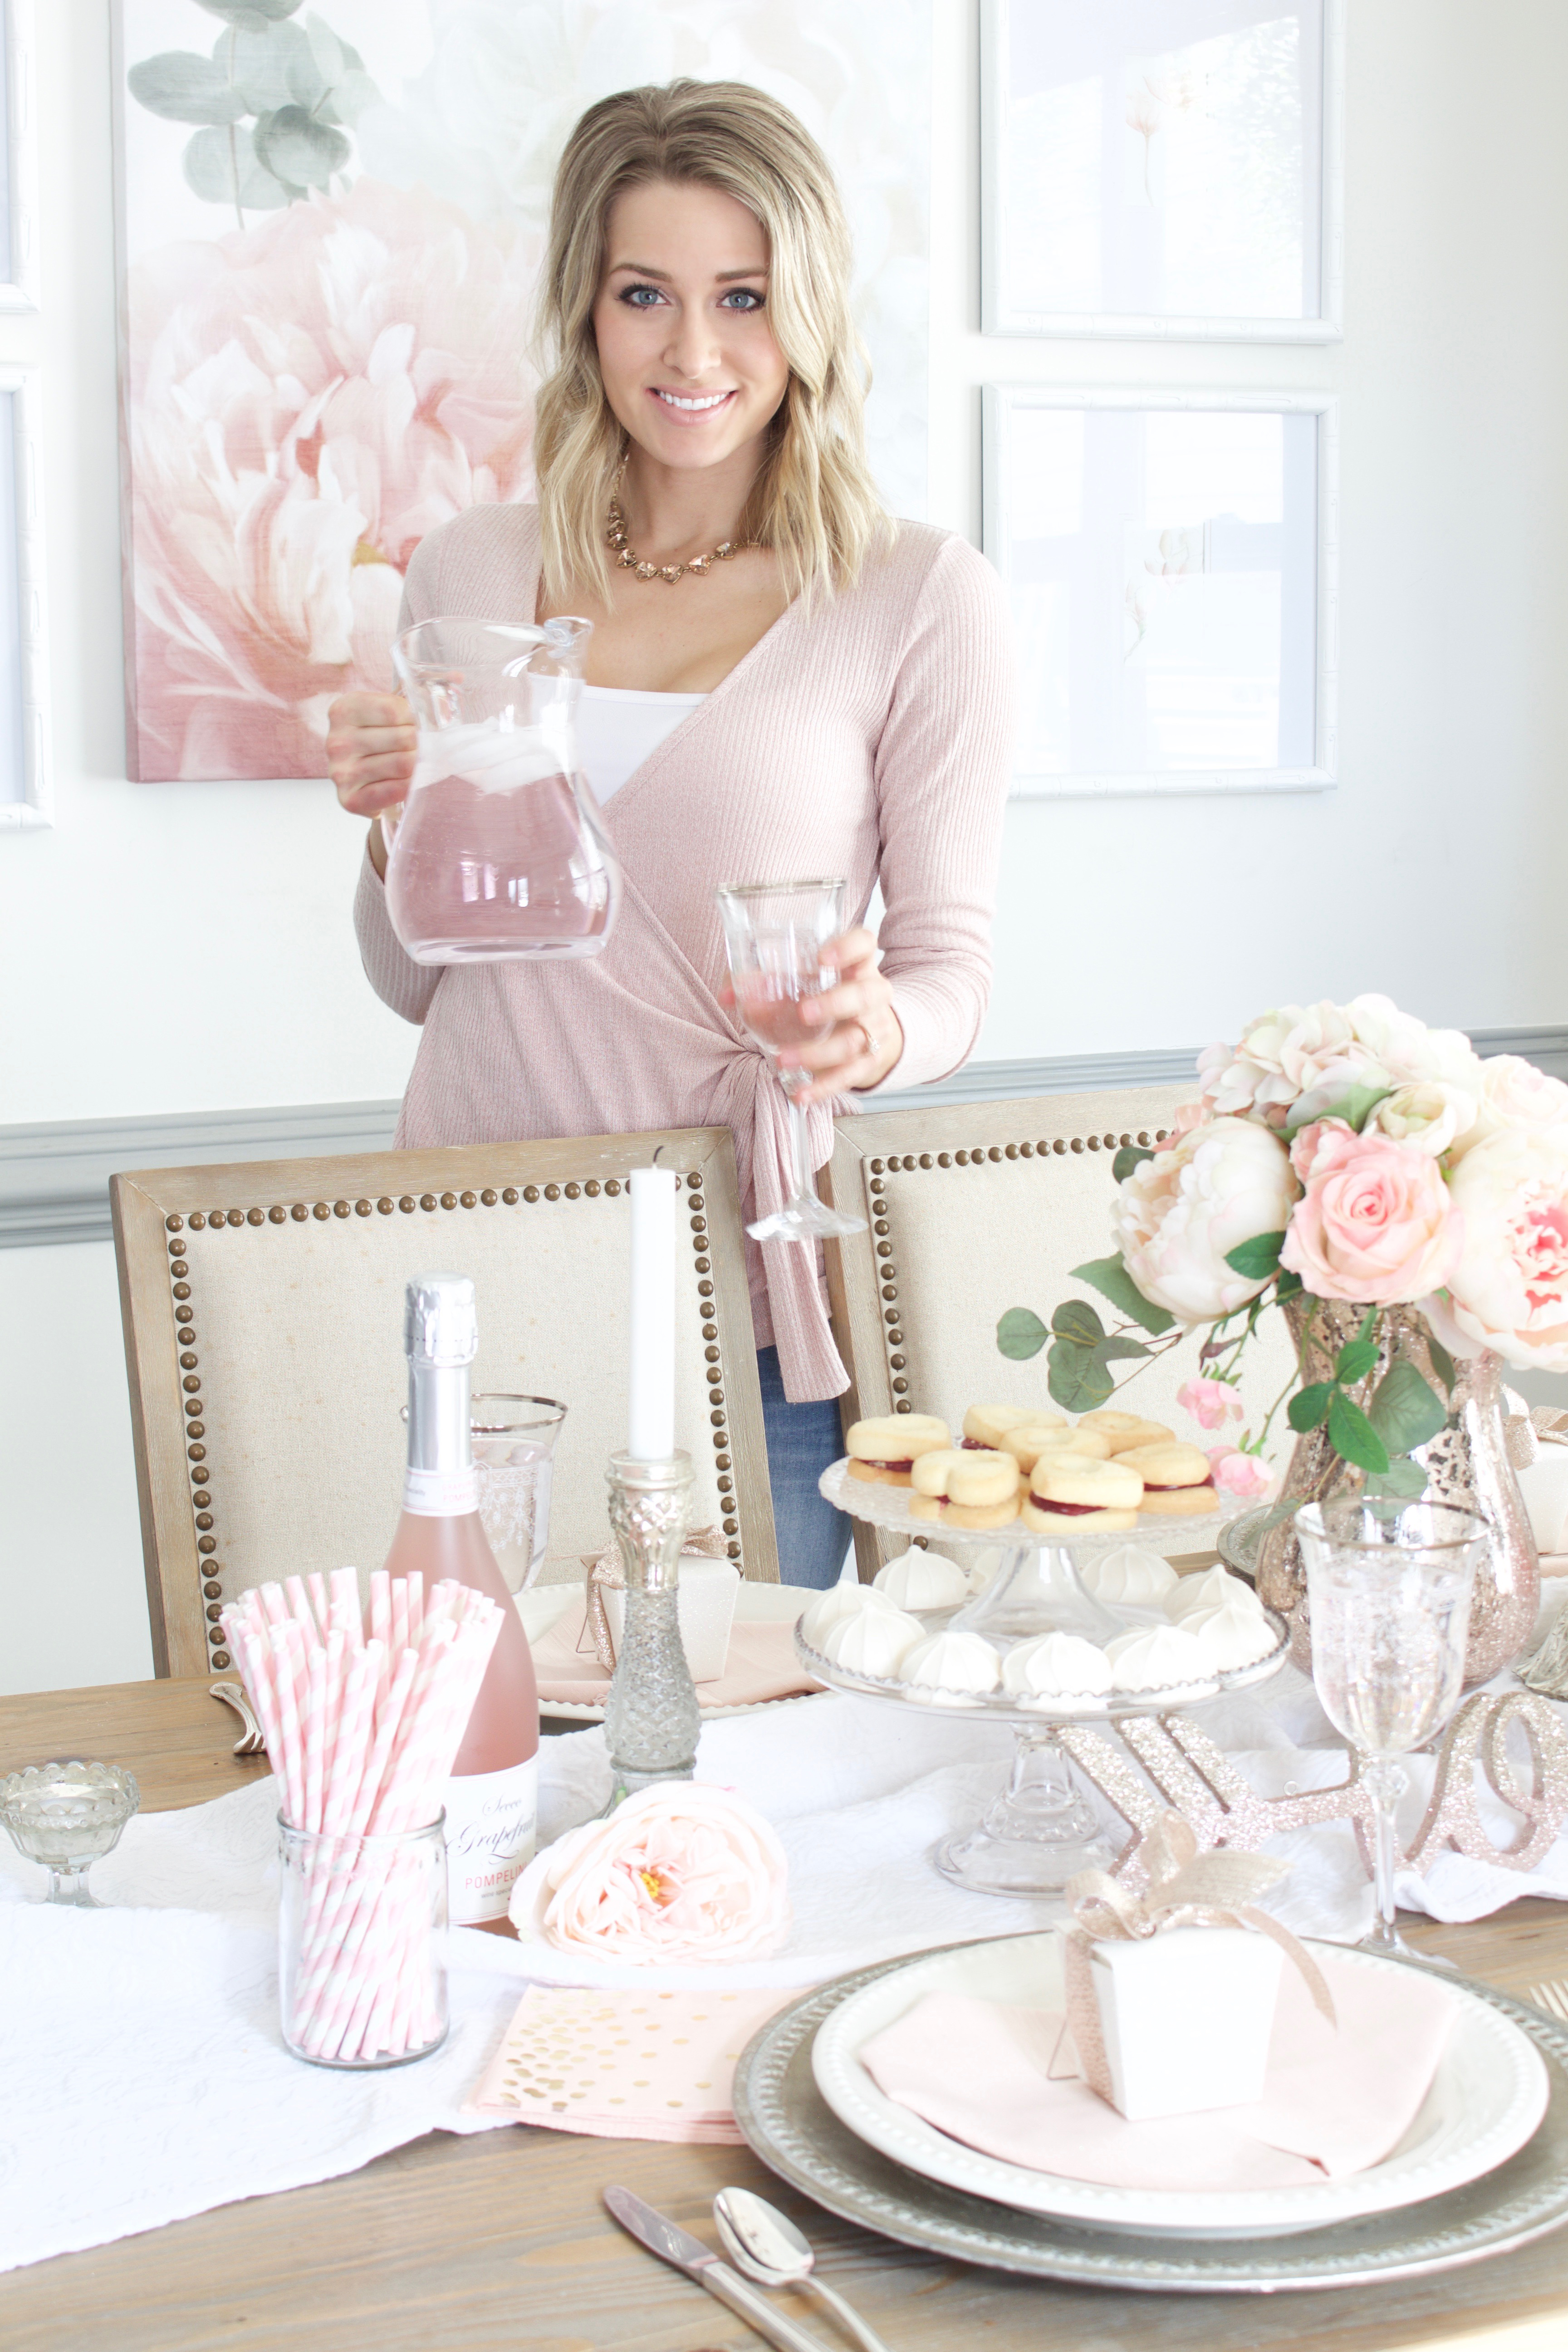 Pretty in Pink: Valentines Day Tablescape Tour with Tuft & Trim